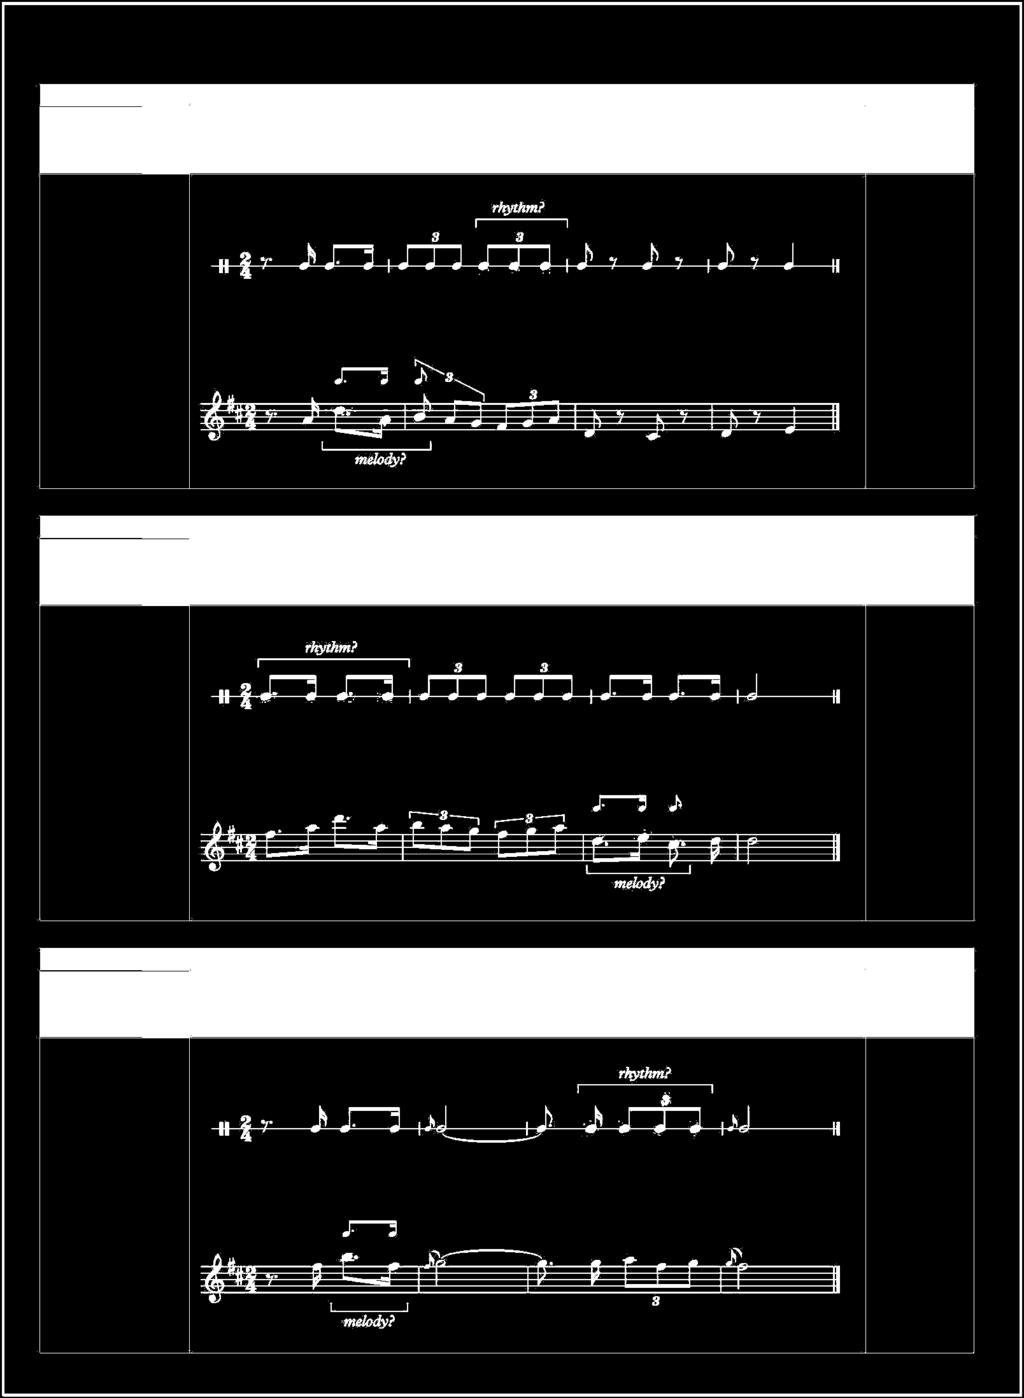 Practice Musical Dictation Questions Musical Dictation - J.S. Bach: Brandenburg Concerto no. 5 in D major (3rd movement) (a) Rhythm correct (3) (b) Pitches correct (3) 6 Musical Dictation - J.S. Bach: Brandenburg Concerto no. 5 in D major (3rd movement) 2 (a) Rhythm correct (4) 2 (b) Pitches correct (3) 7 Musical Dictation - J.